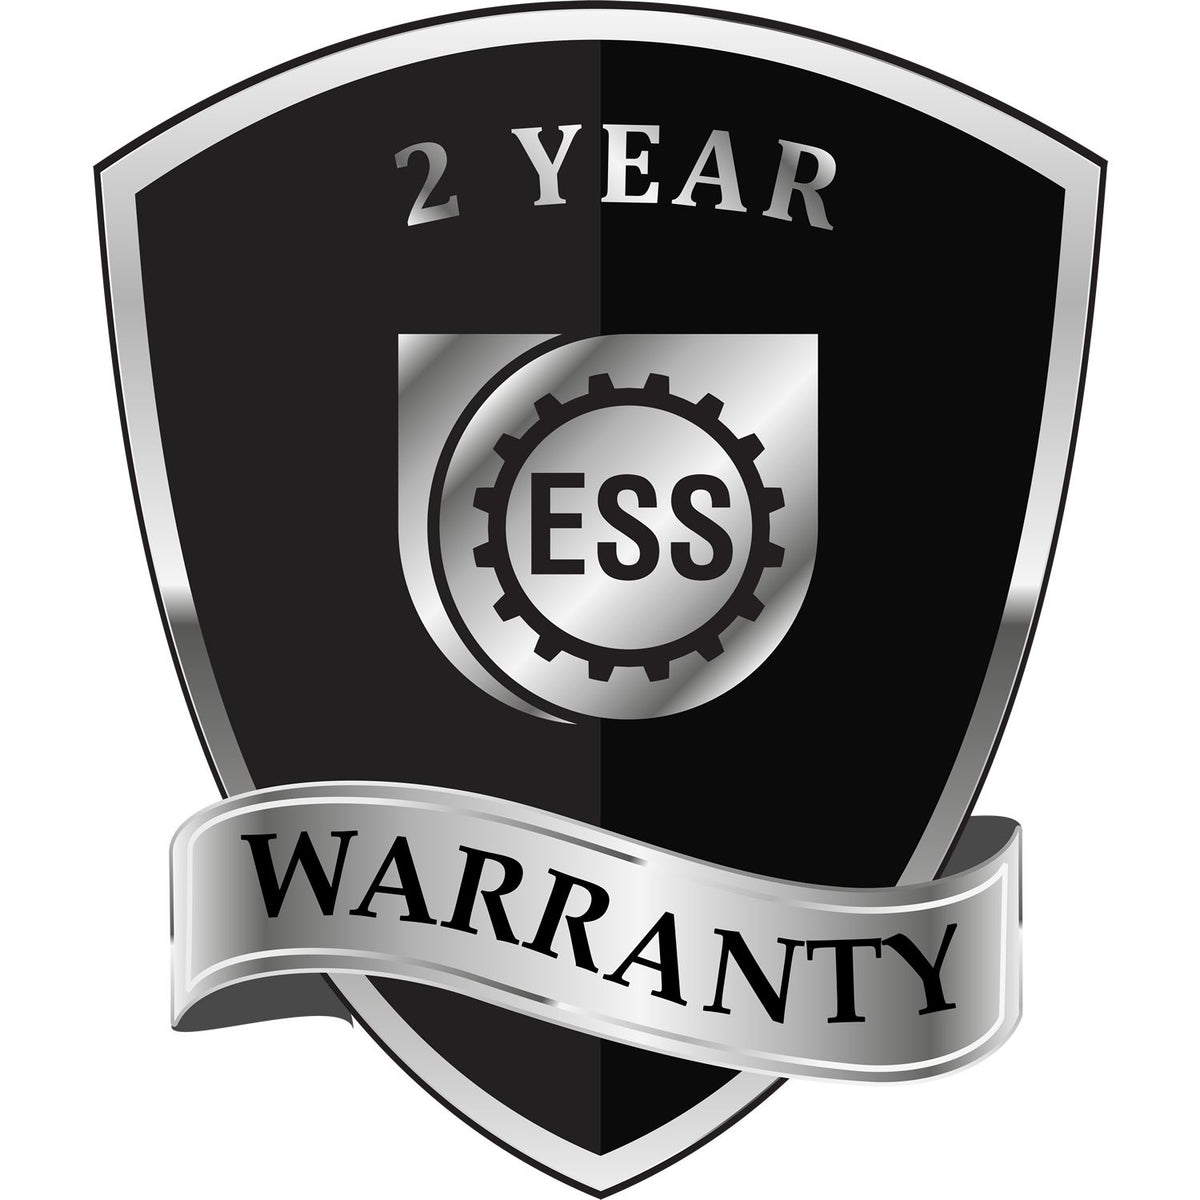 A badge or emblem showing a warranty icon for the Heavy Duty Cast Iron Connecticut Land Surveyor Seal Embosser